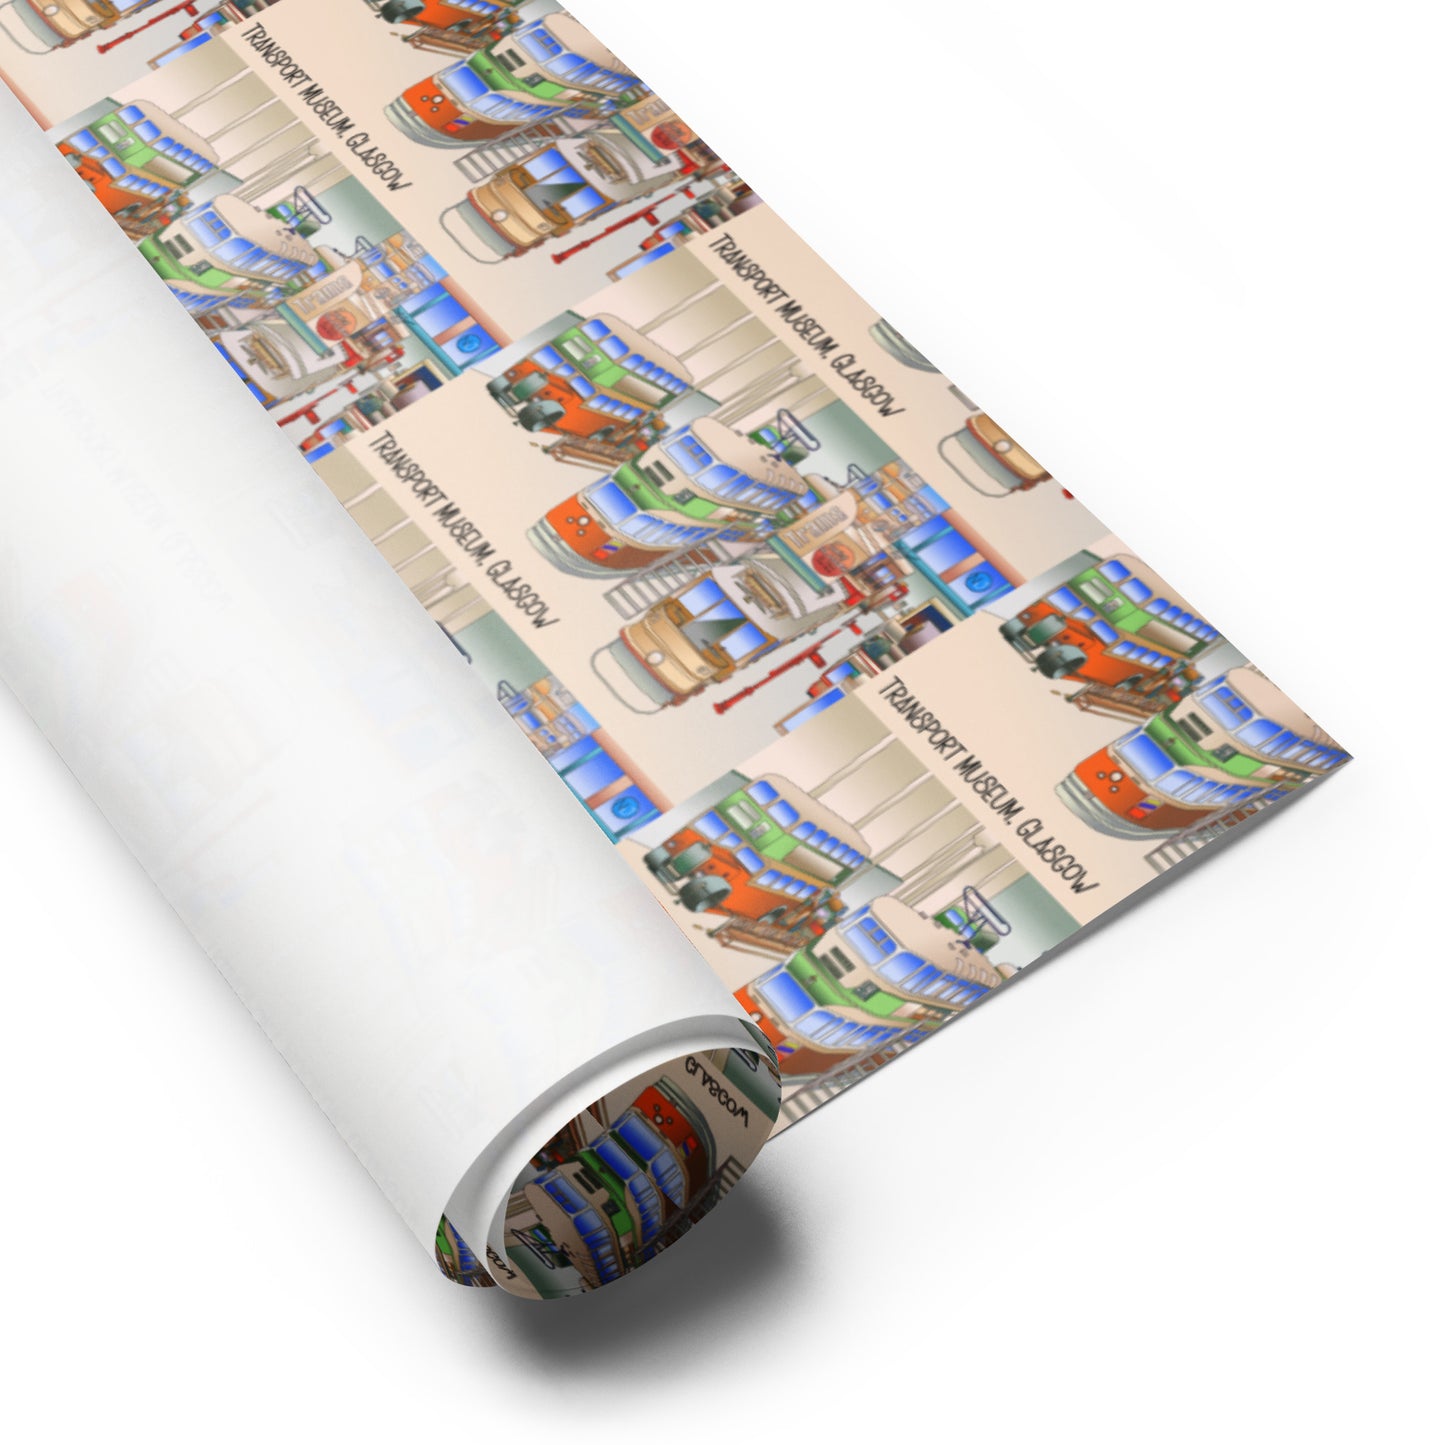 Glasgow Art Gallery Wrapping Paper x 3 Sheets - Kelvingrove / Transport Museum / Peoples Palace